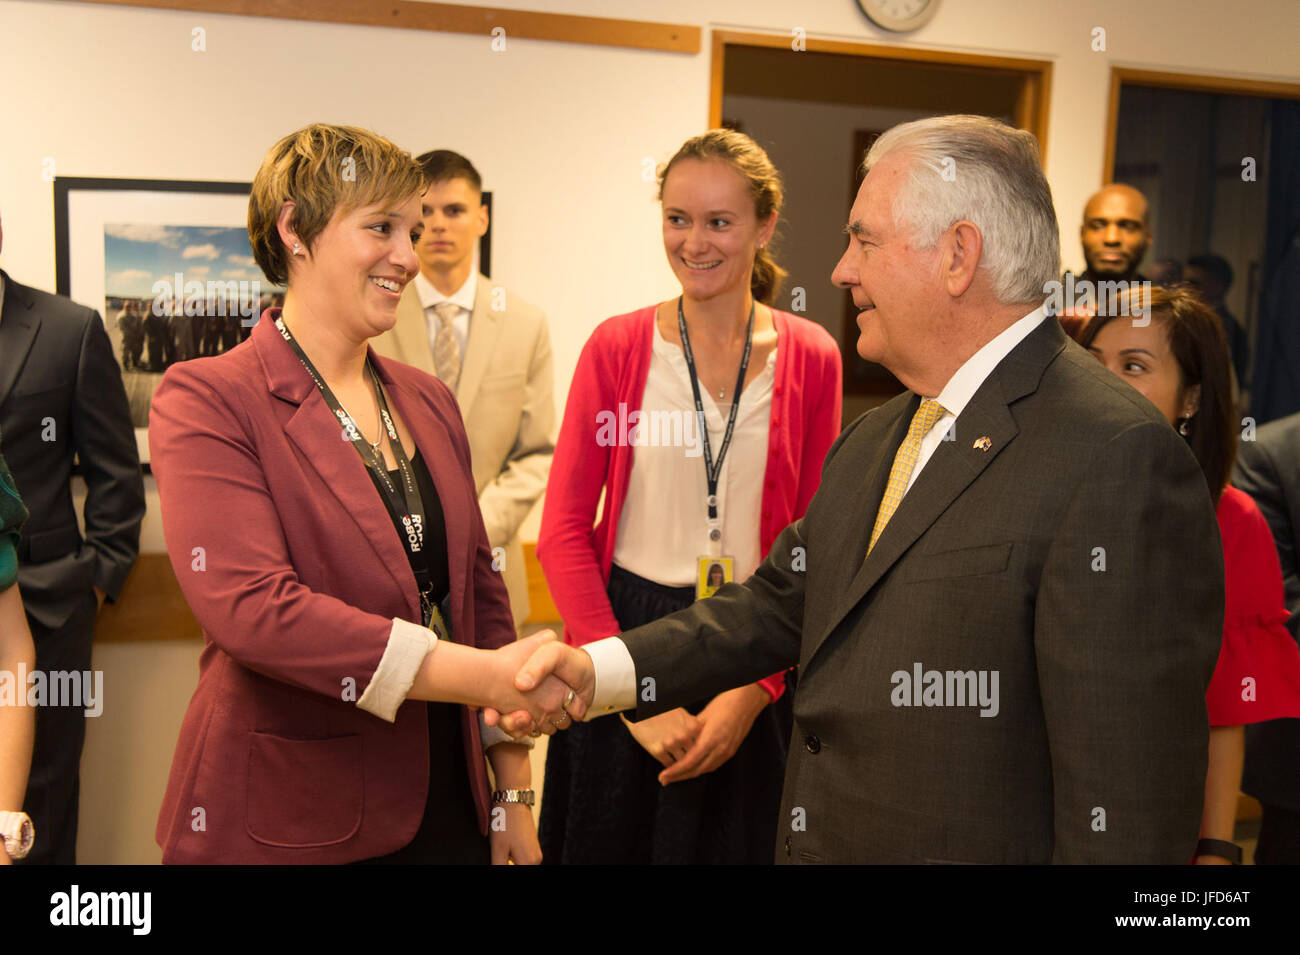 U.S. Secretary of State Rex Tillerson meets with U.S. Embassy colleagues in Wellington, New Zealand, on June 6, 2017. Stock Photo